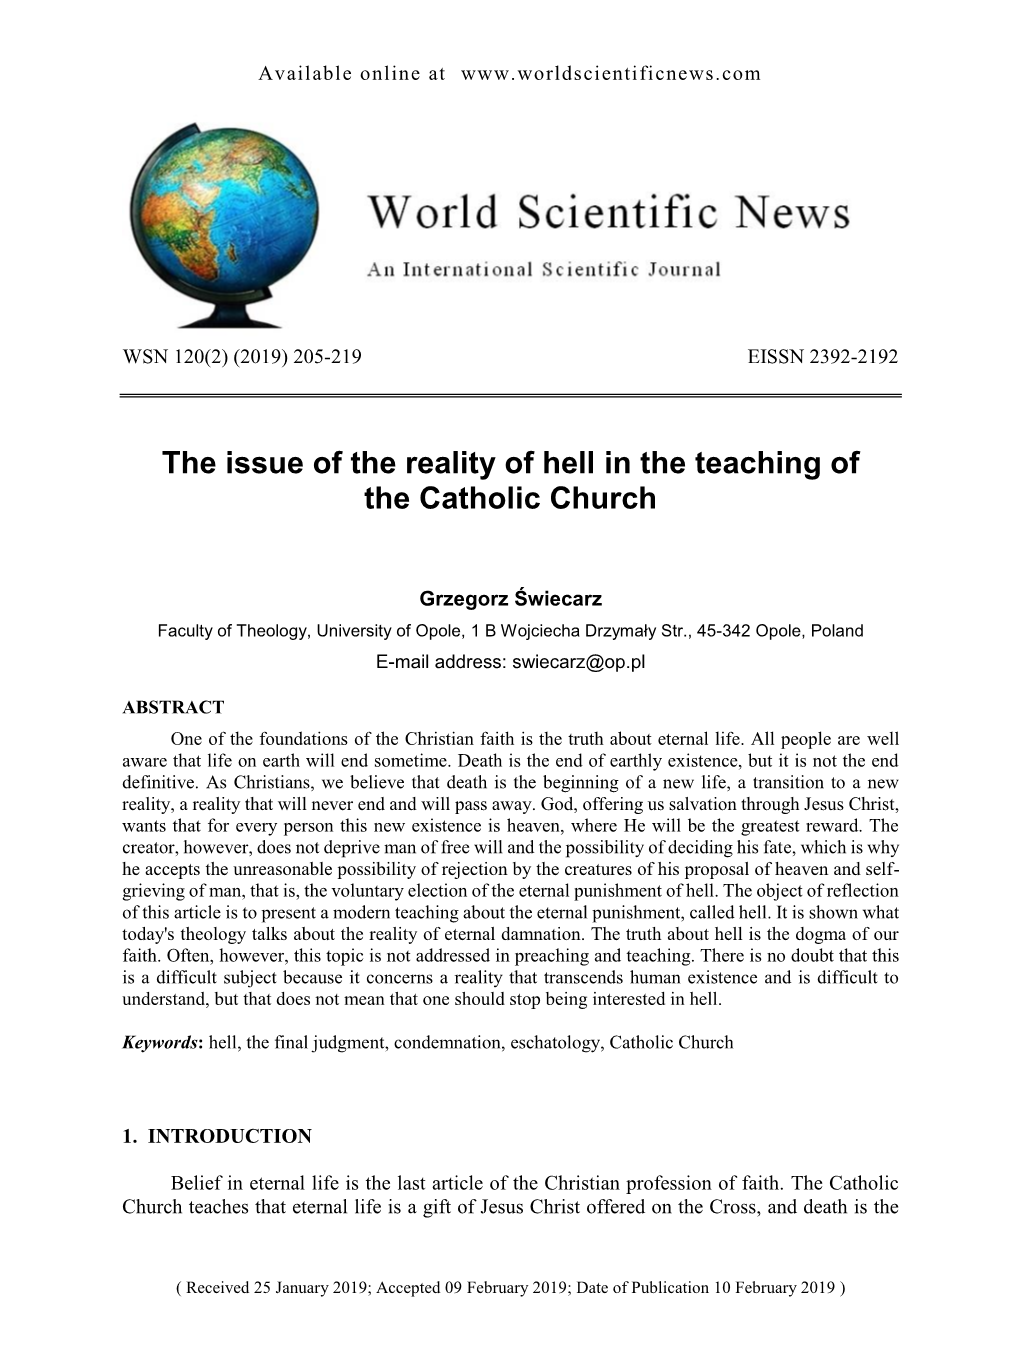 The Issue of the Reality of Hell in the Teaching of the Catholic Church